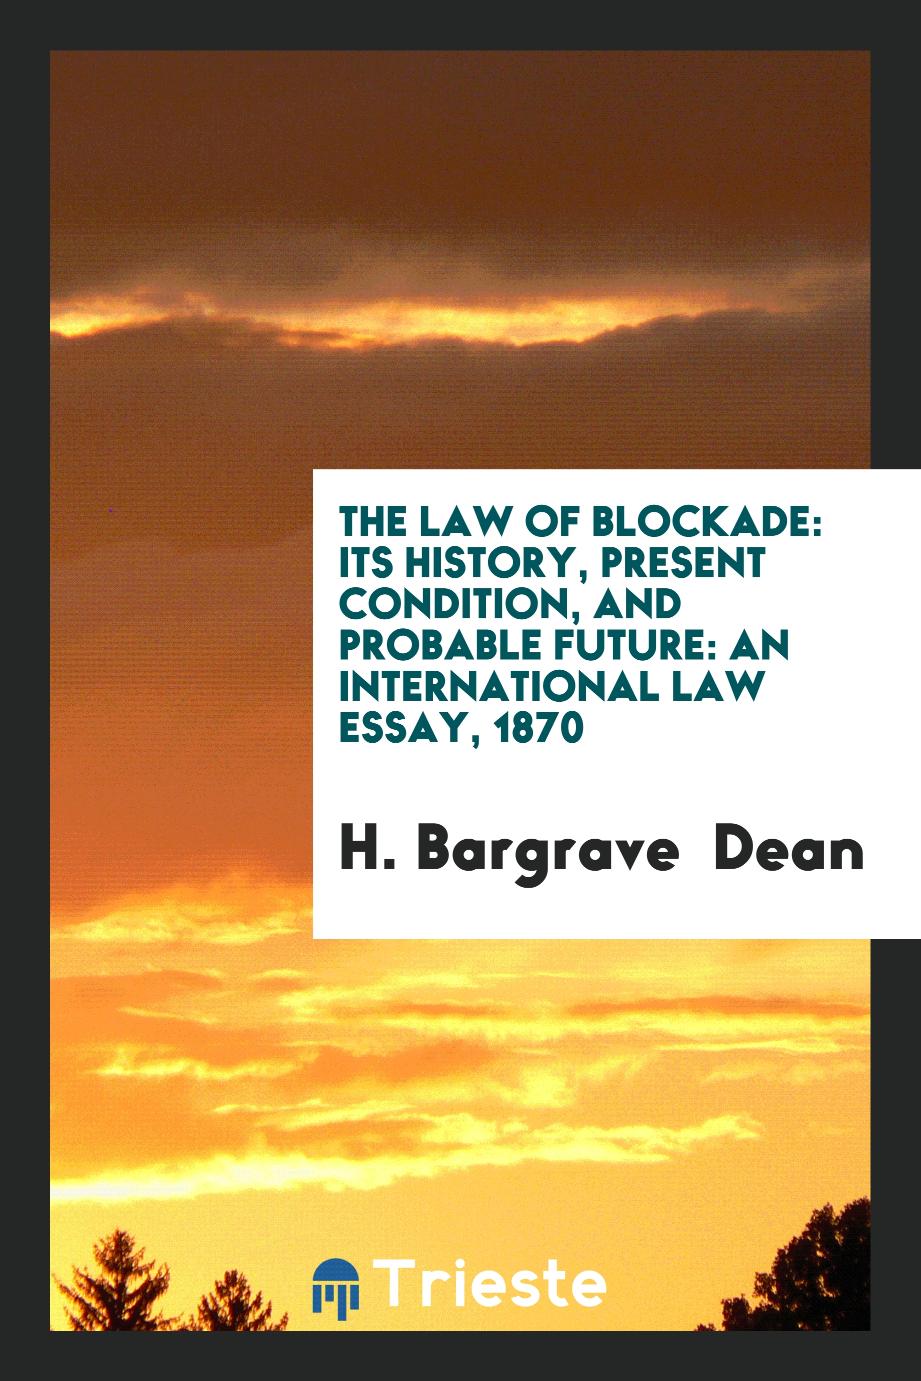 The Law of Blockade: Its History, Present Condition, and Probable Future: An International Law Essay, 1870